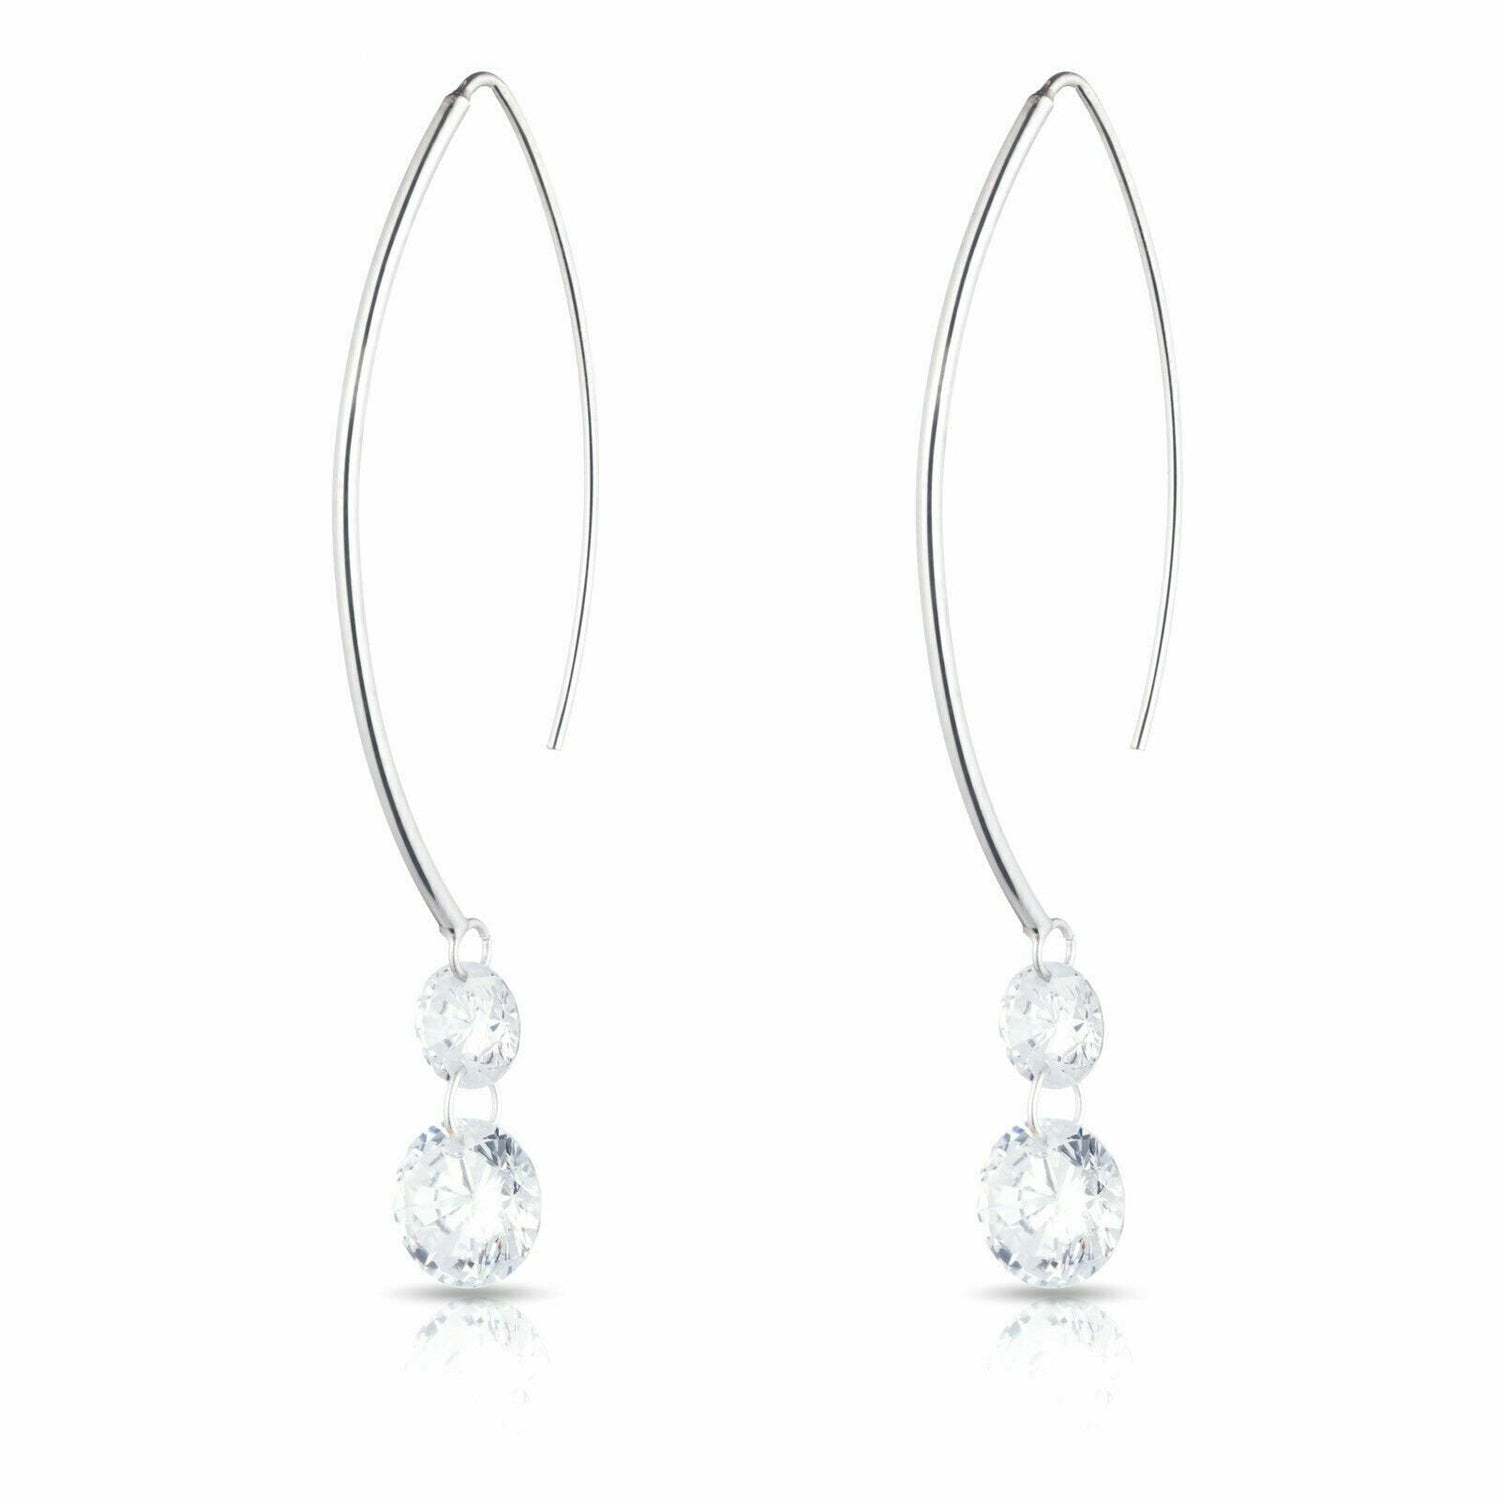 Sterling Silver Hanging Cubic Zirconia Earring - 2 CZ Stones